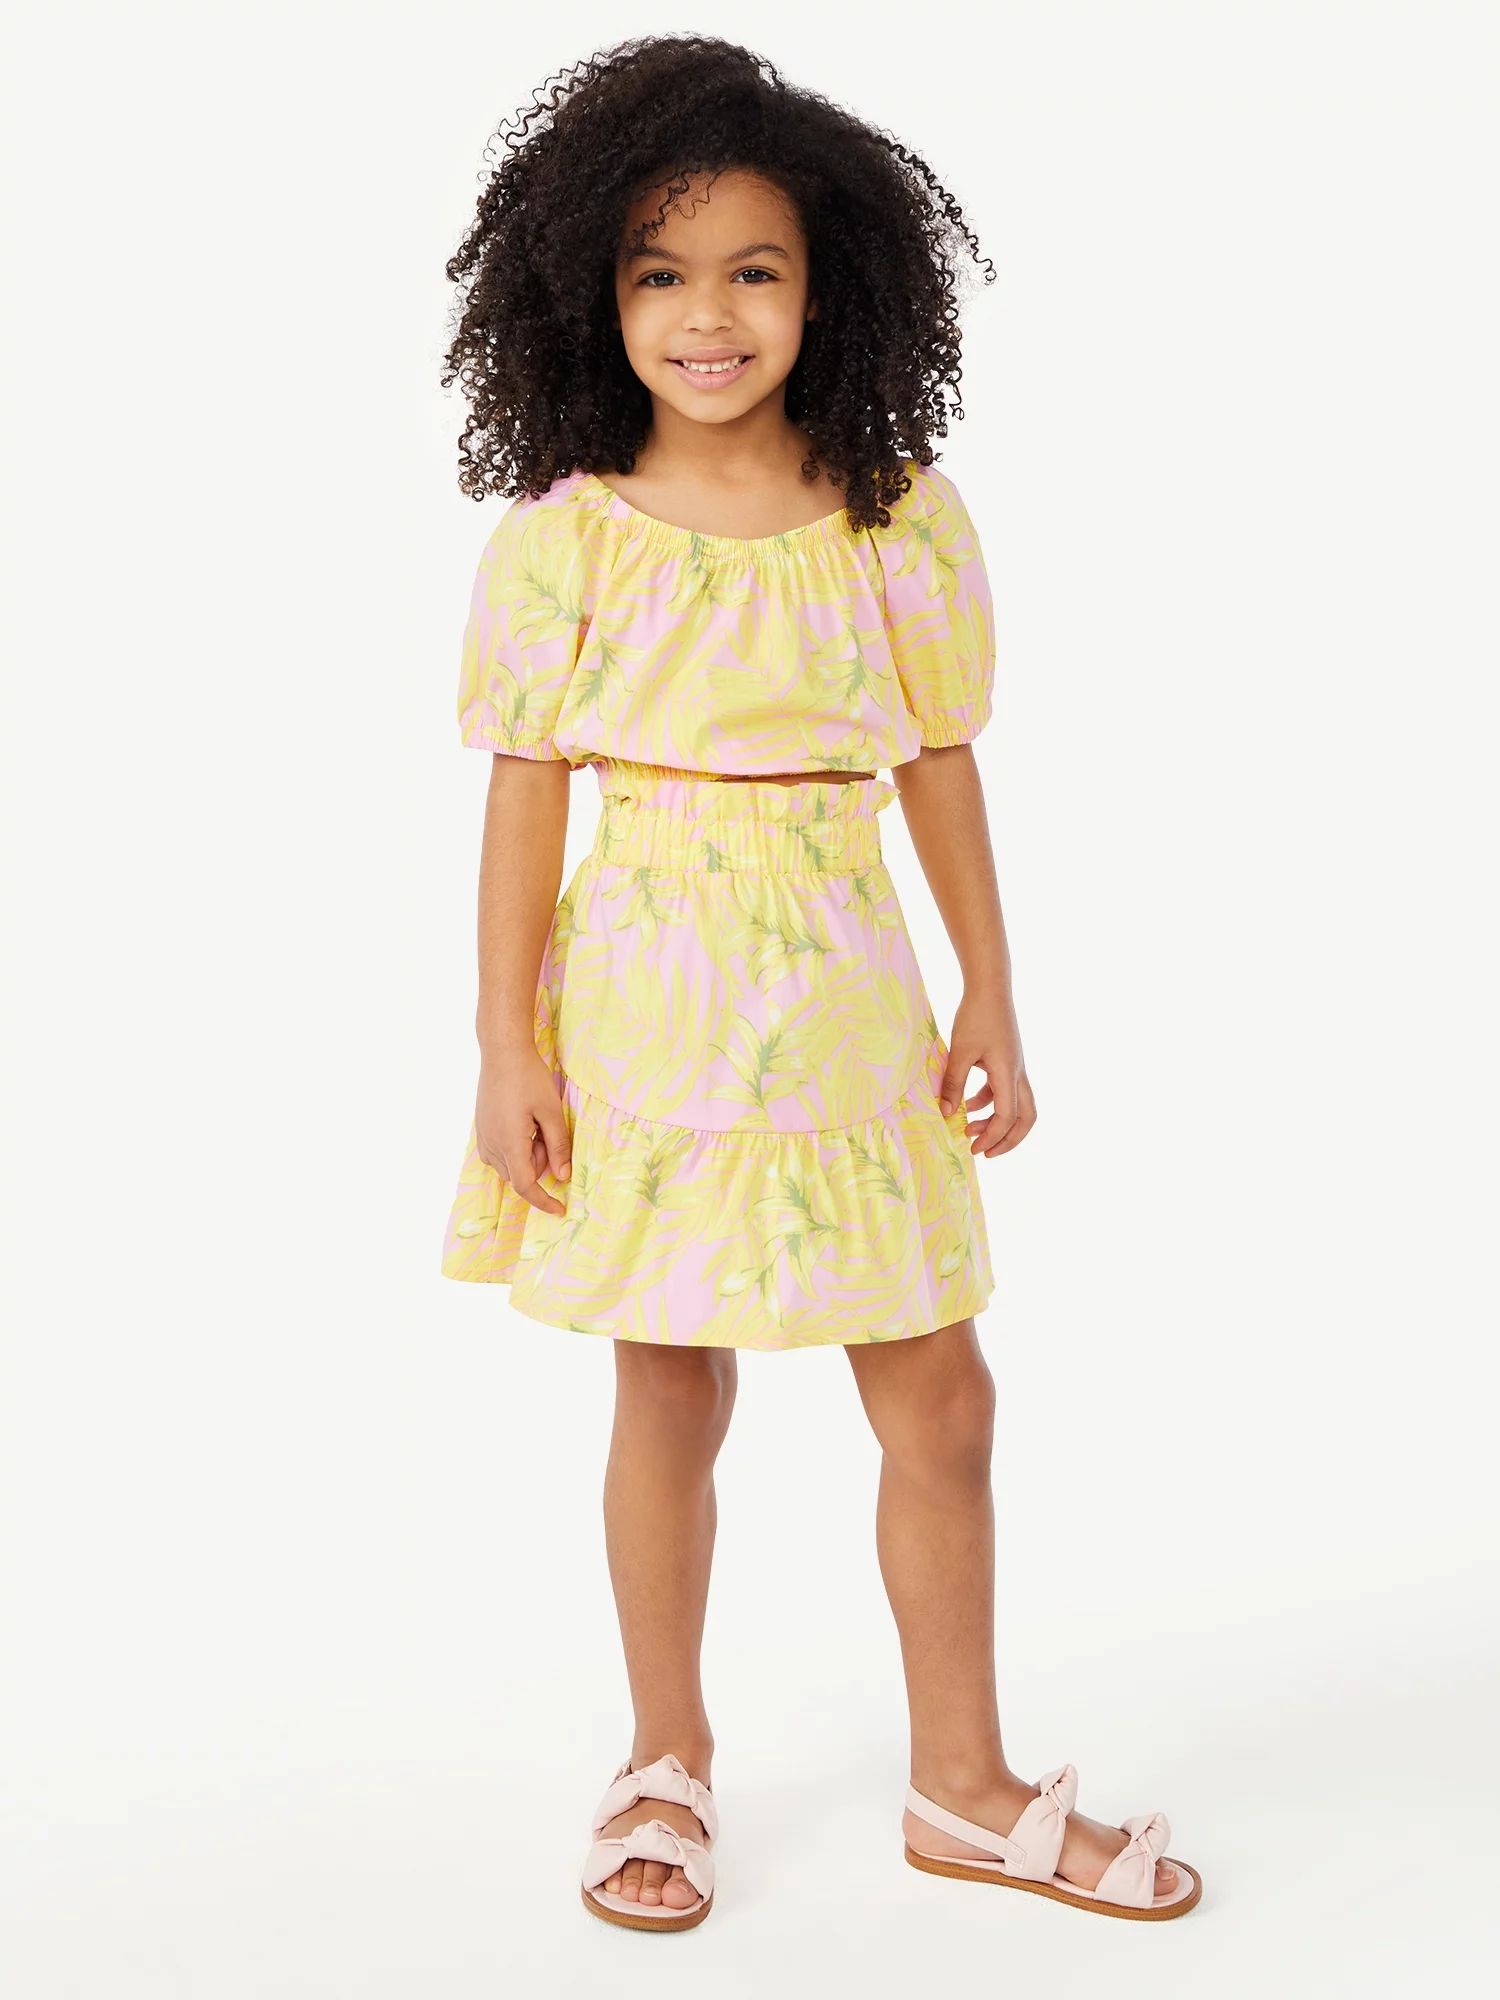 Scoop Girls Puff Sleeve Crop Top and Matching Ruffle Skirt, 2-Piece Outfit Set, Sizes 4-12 | Walmart (US)